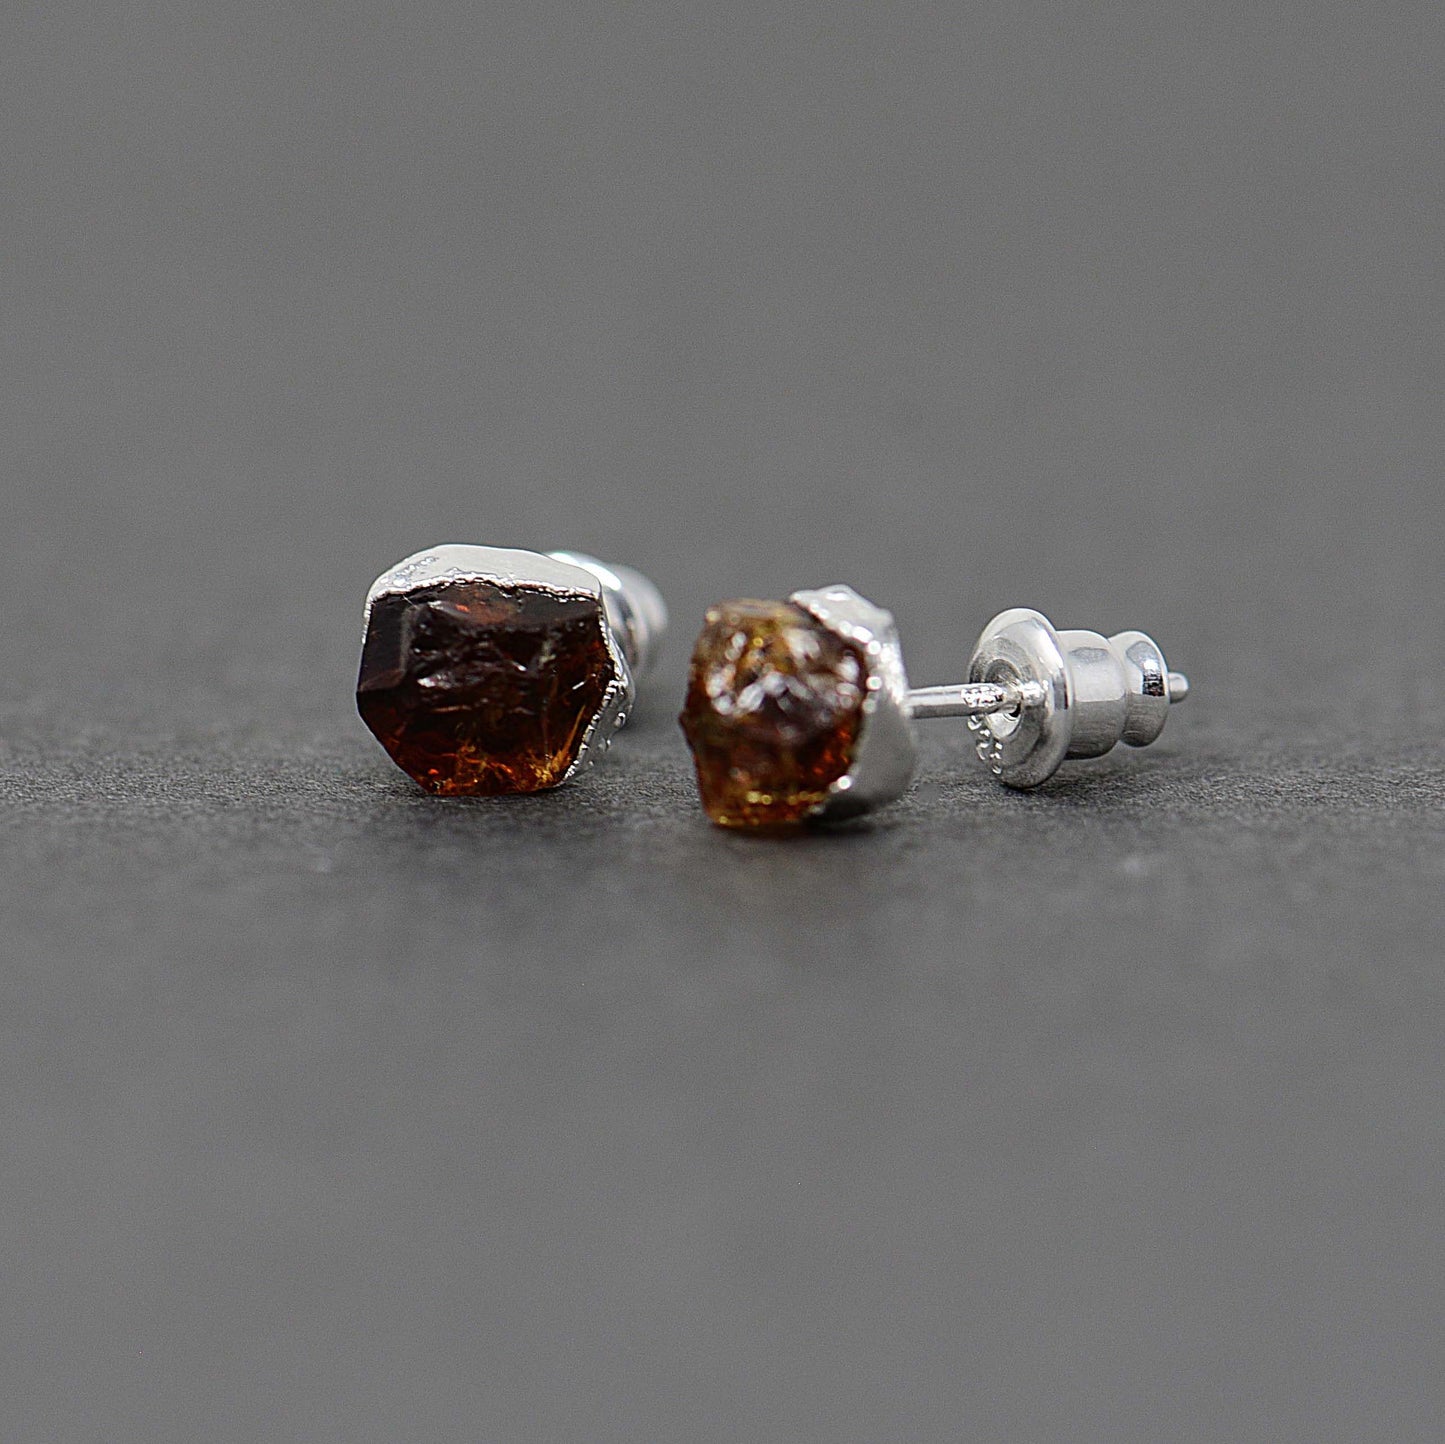 Silver stud earrings with Rough Citrine